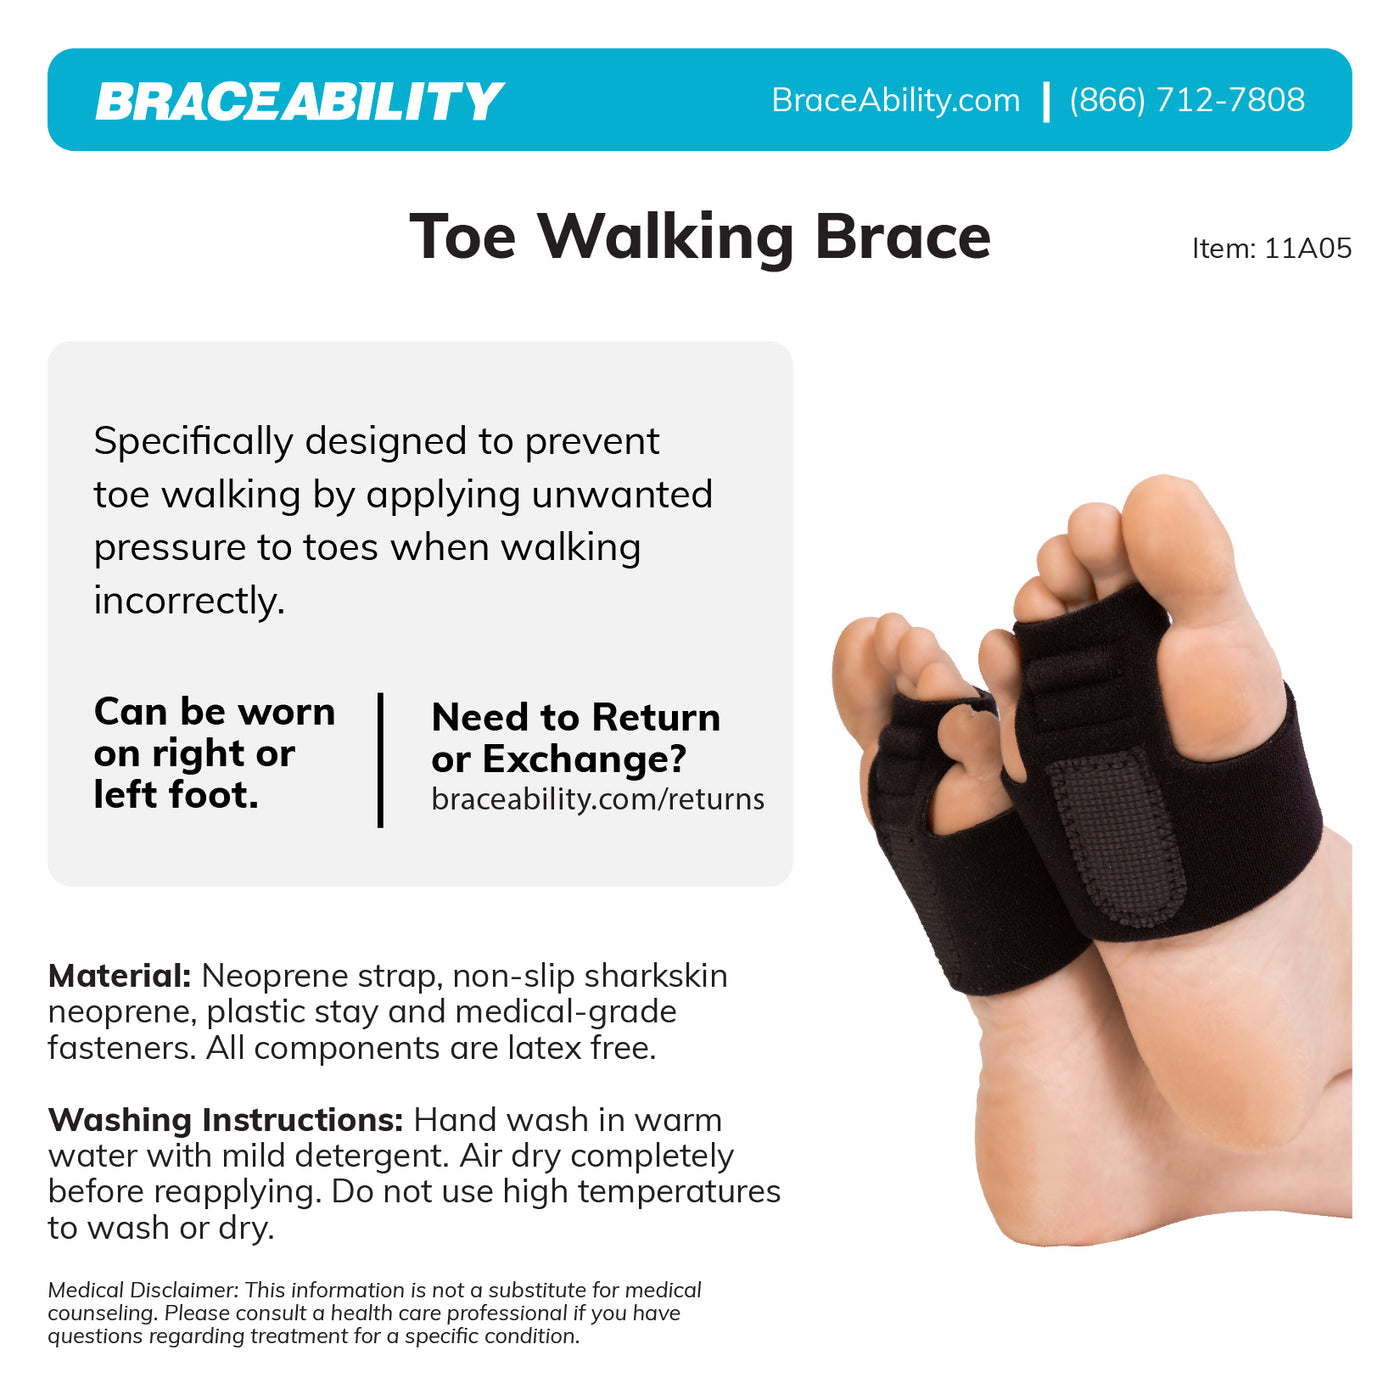 to clean the toe walking brace, hand wash in warm water with mild detergent, air dry